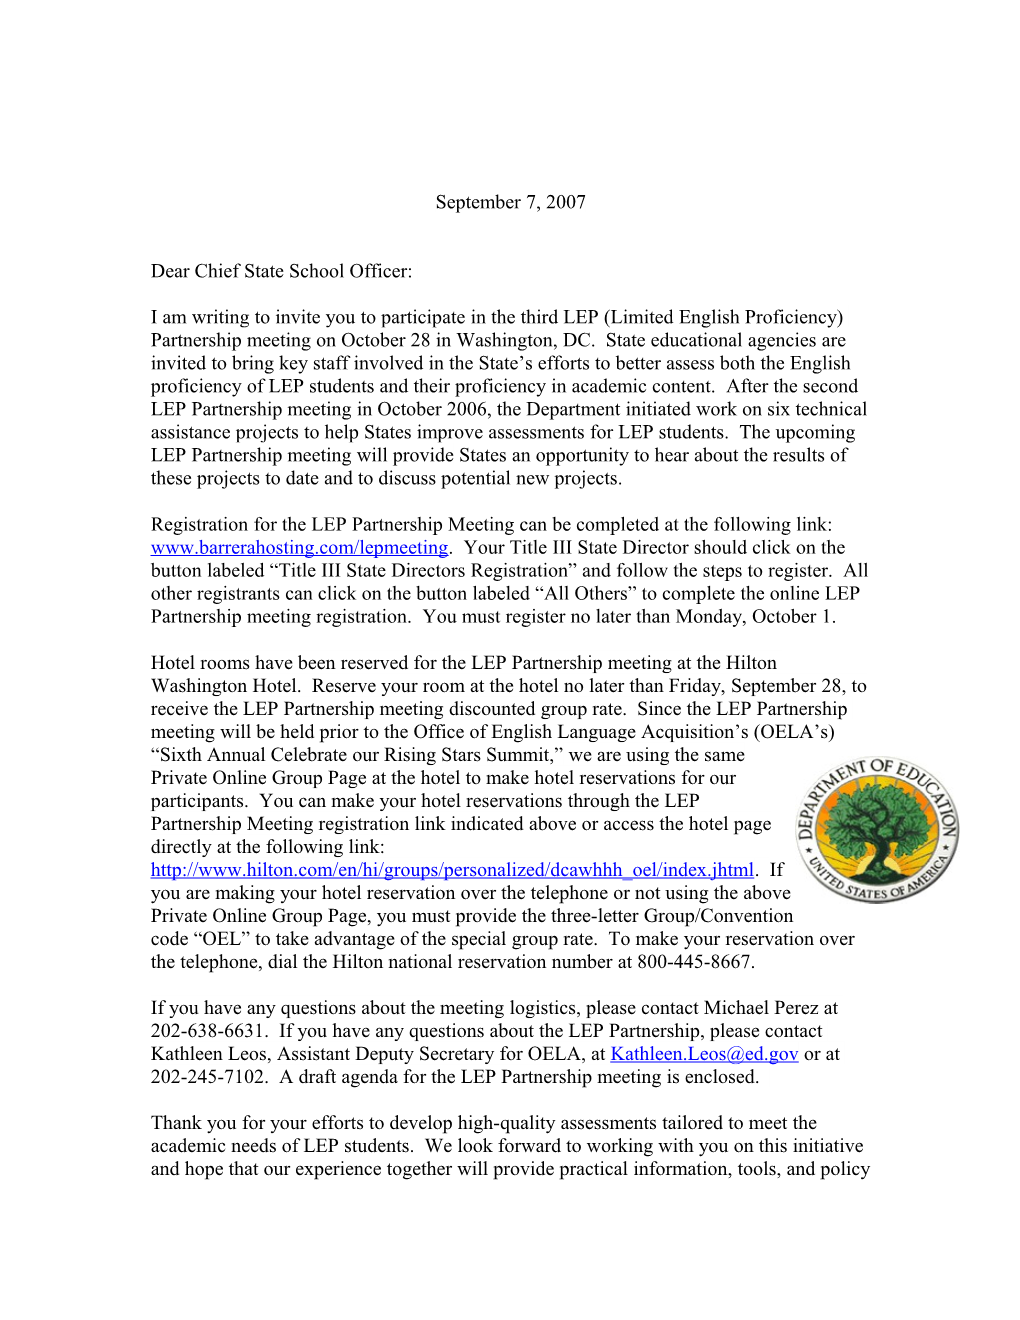 Letter of Invitation for LEP Partnership Meeting, Sunday, October 28, 2007 October 2007 (Msword)